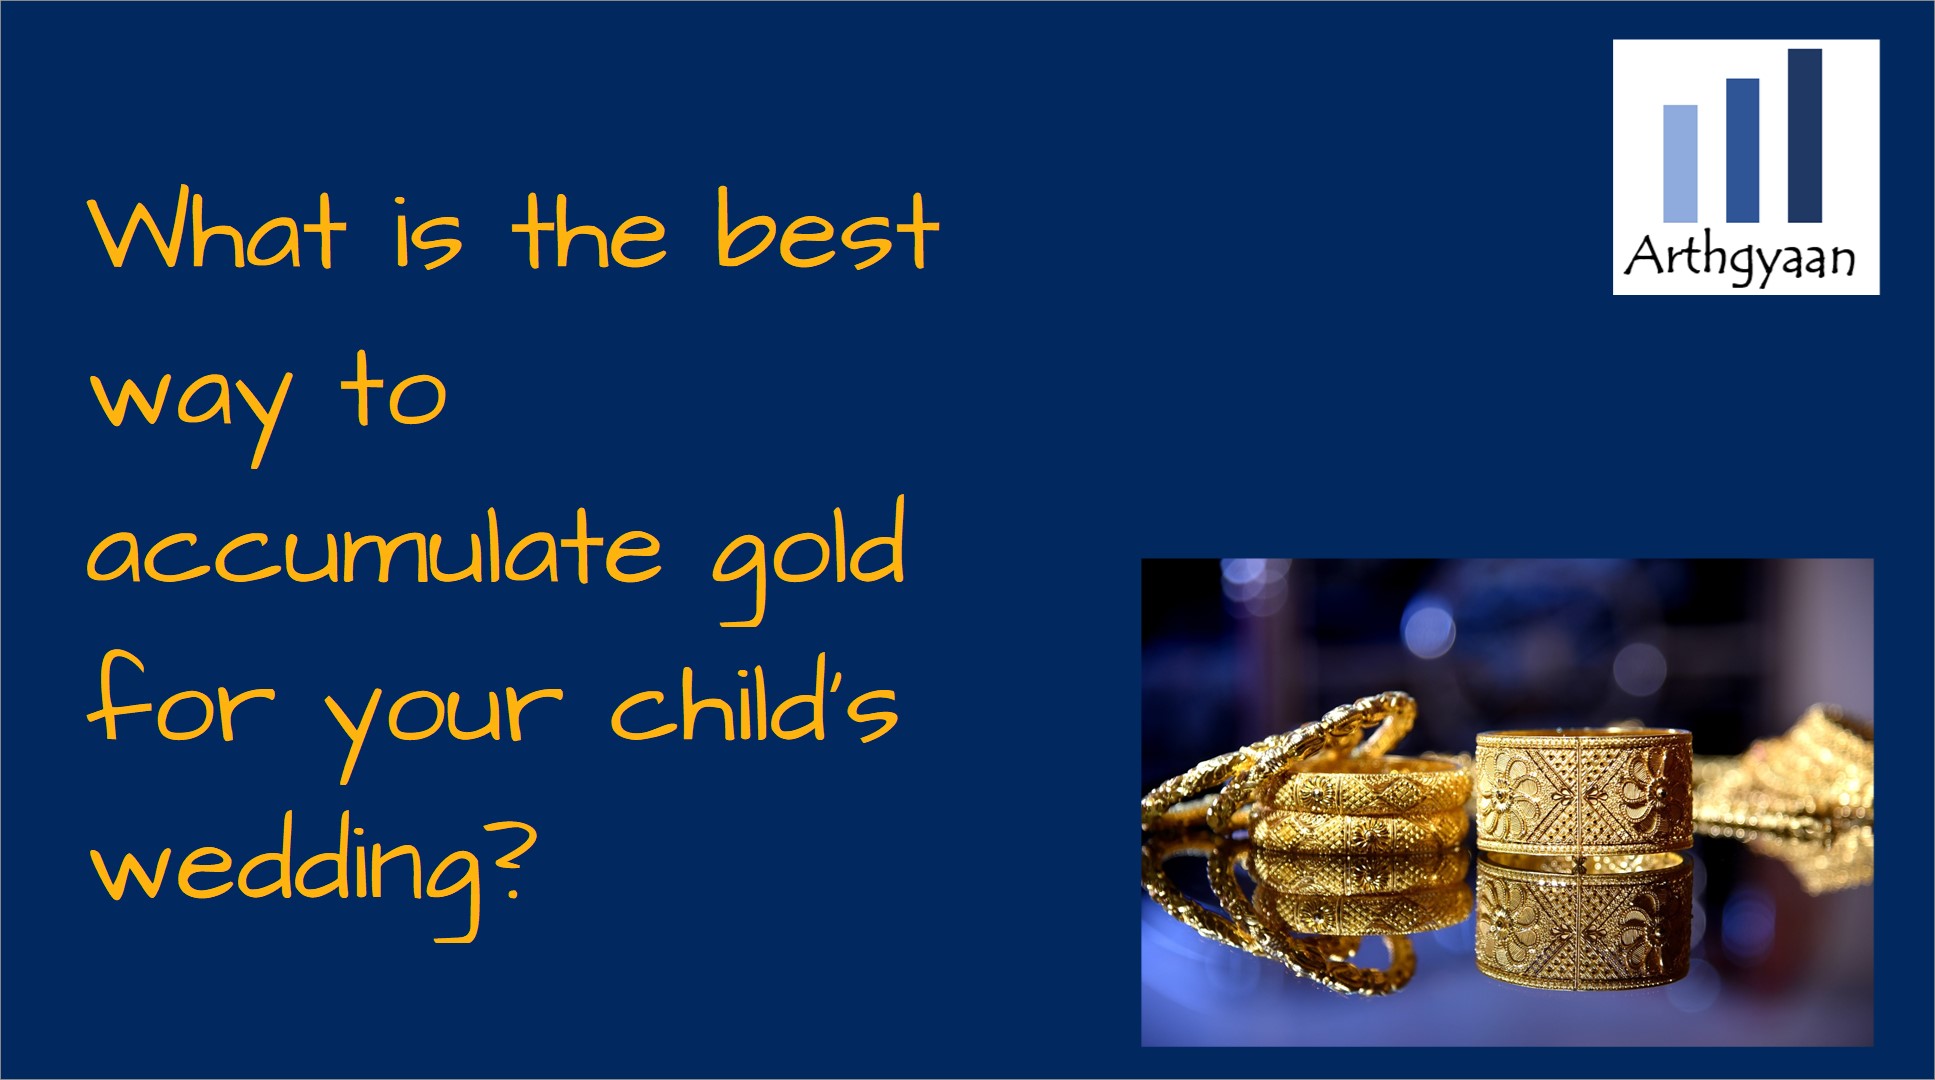 What is the best way to accumulate gold for your child's wedding?